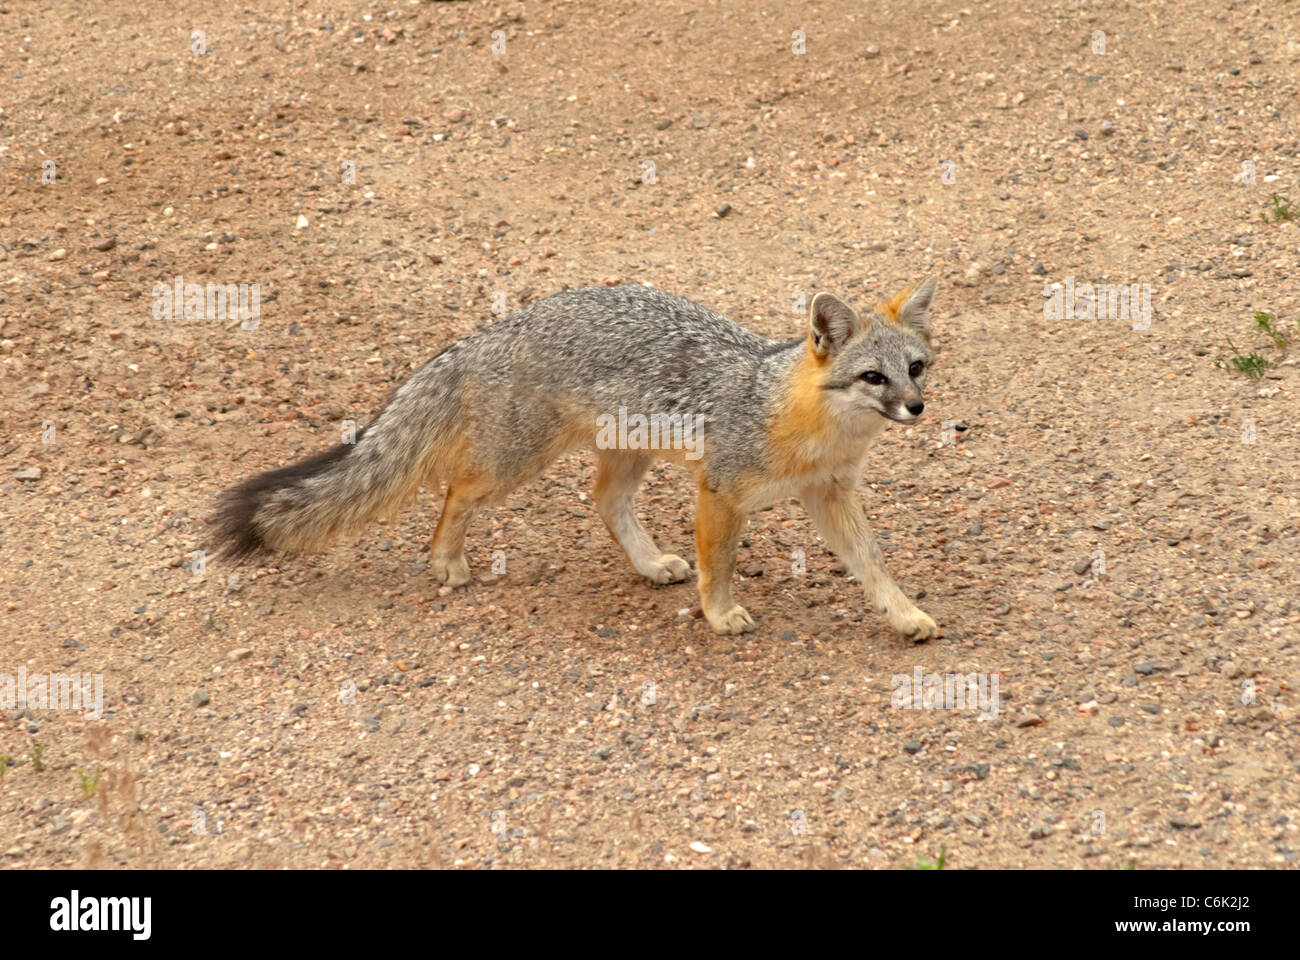 Adult Gray Fox or Grey Fox (Urocyon cinereoargenteus) Pike National Forest, Colorado US. Stock Photo